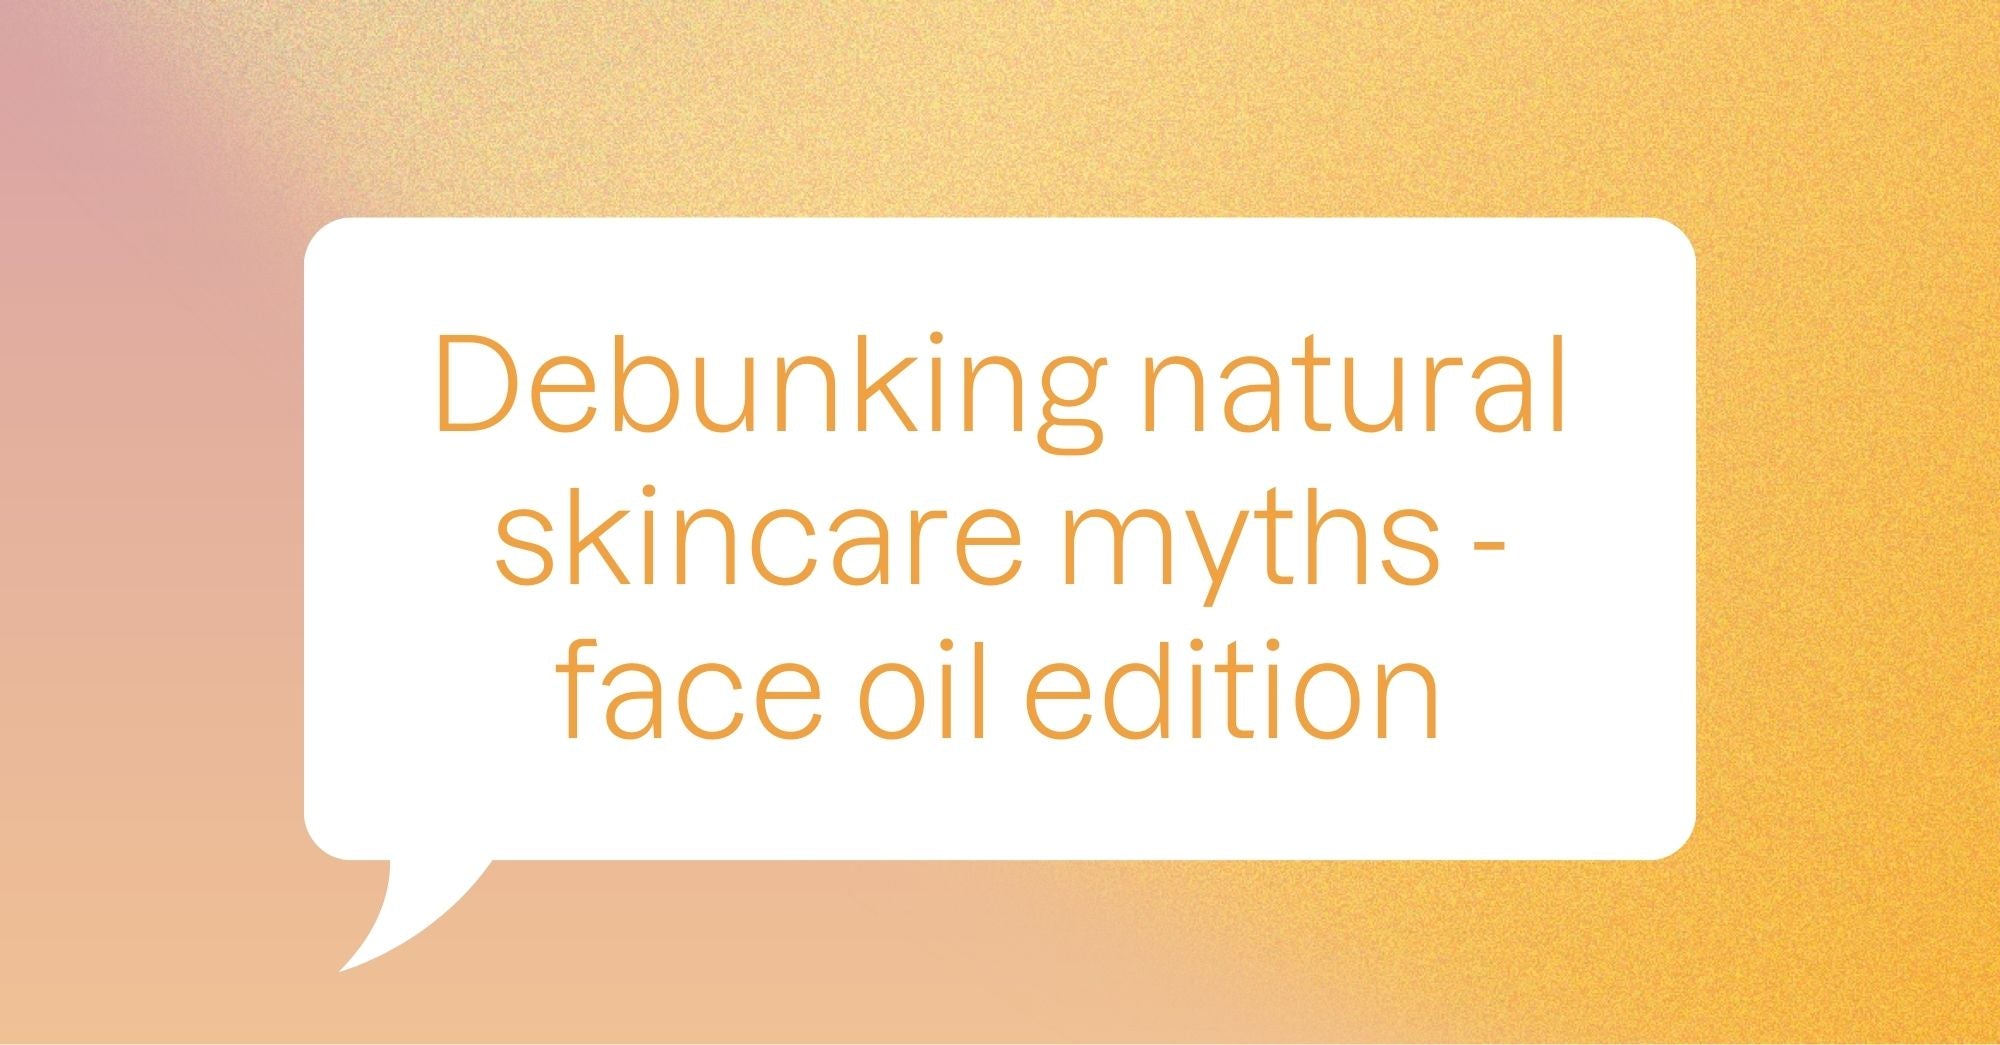 Debunking natural skincare myths - face oil edition